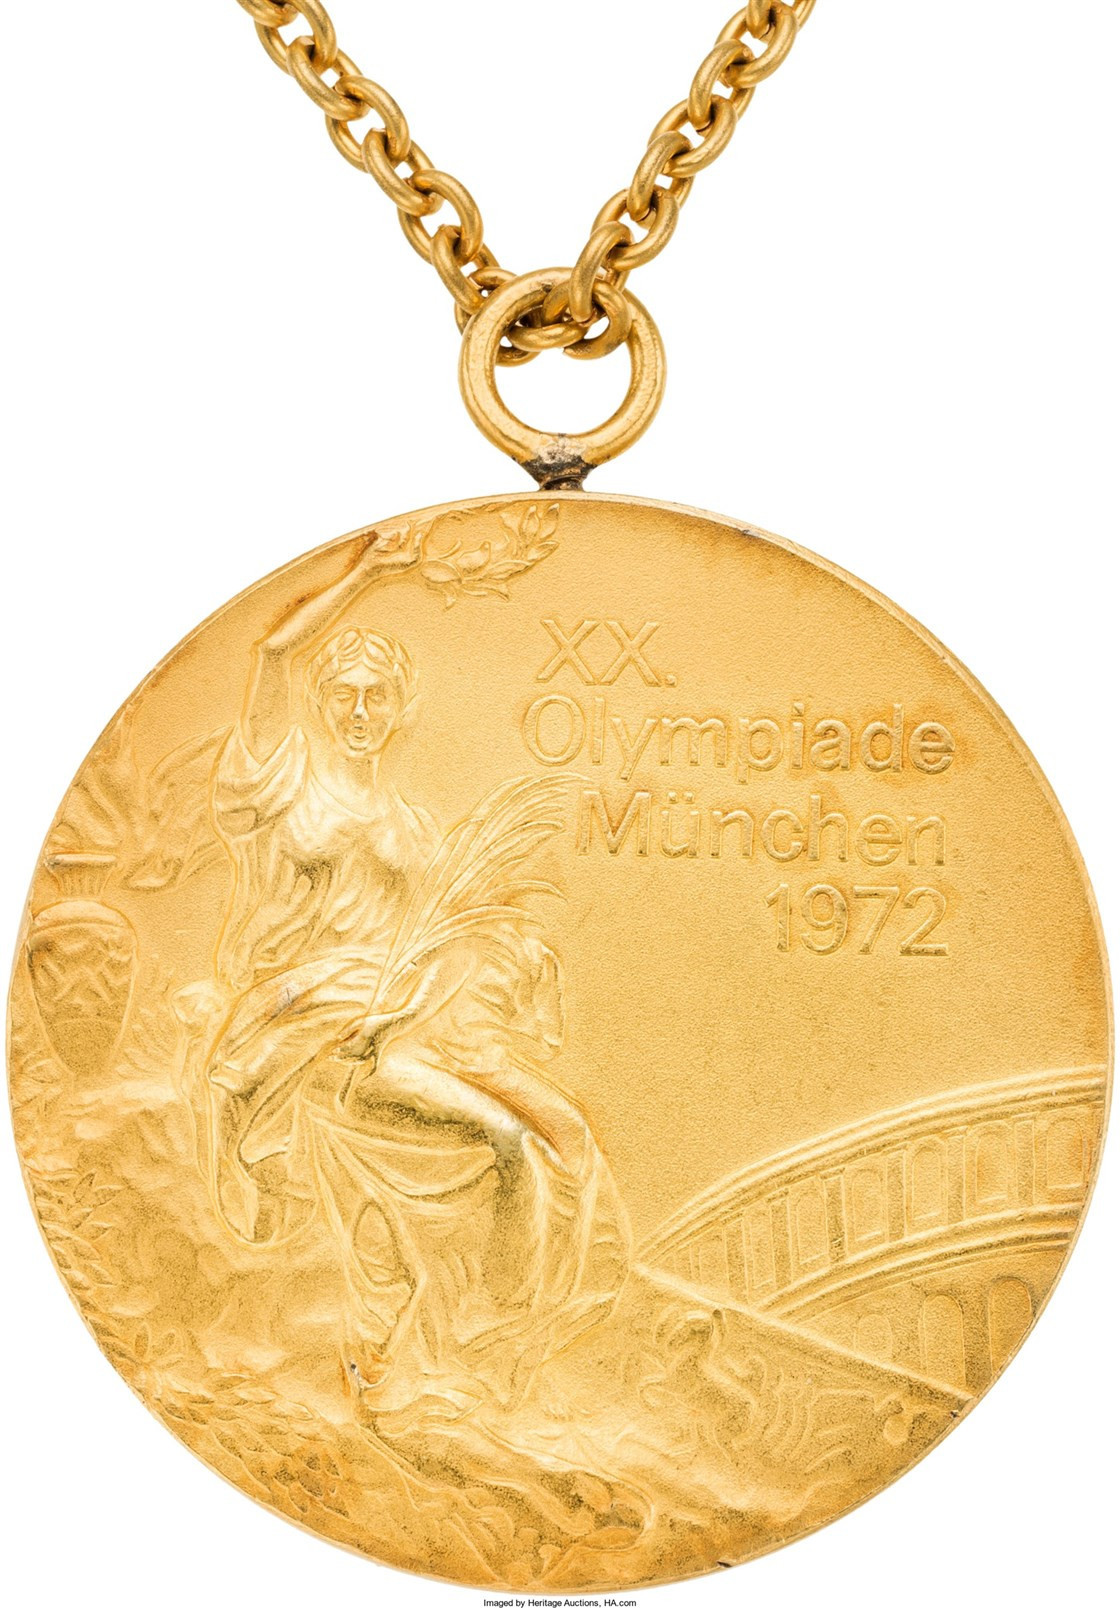 Olga Korbut sold several items of memorabilia, including her Olympic gold medals, at an earlier auction in 2017 ©Heritage Auctions